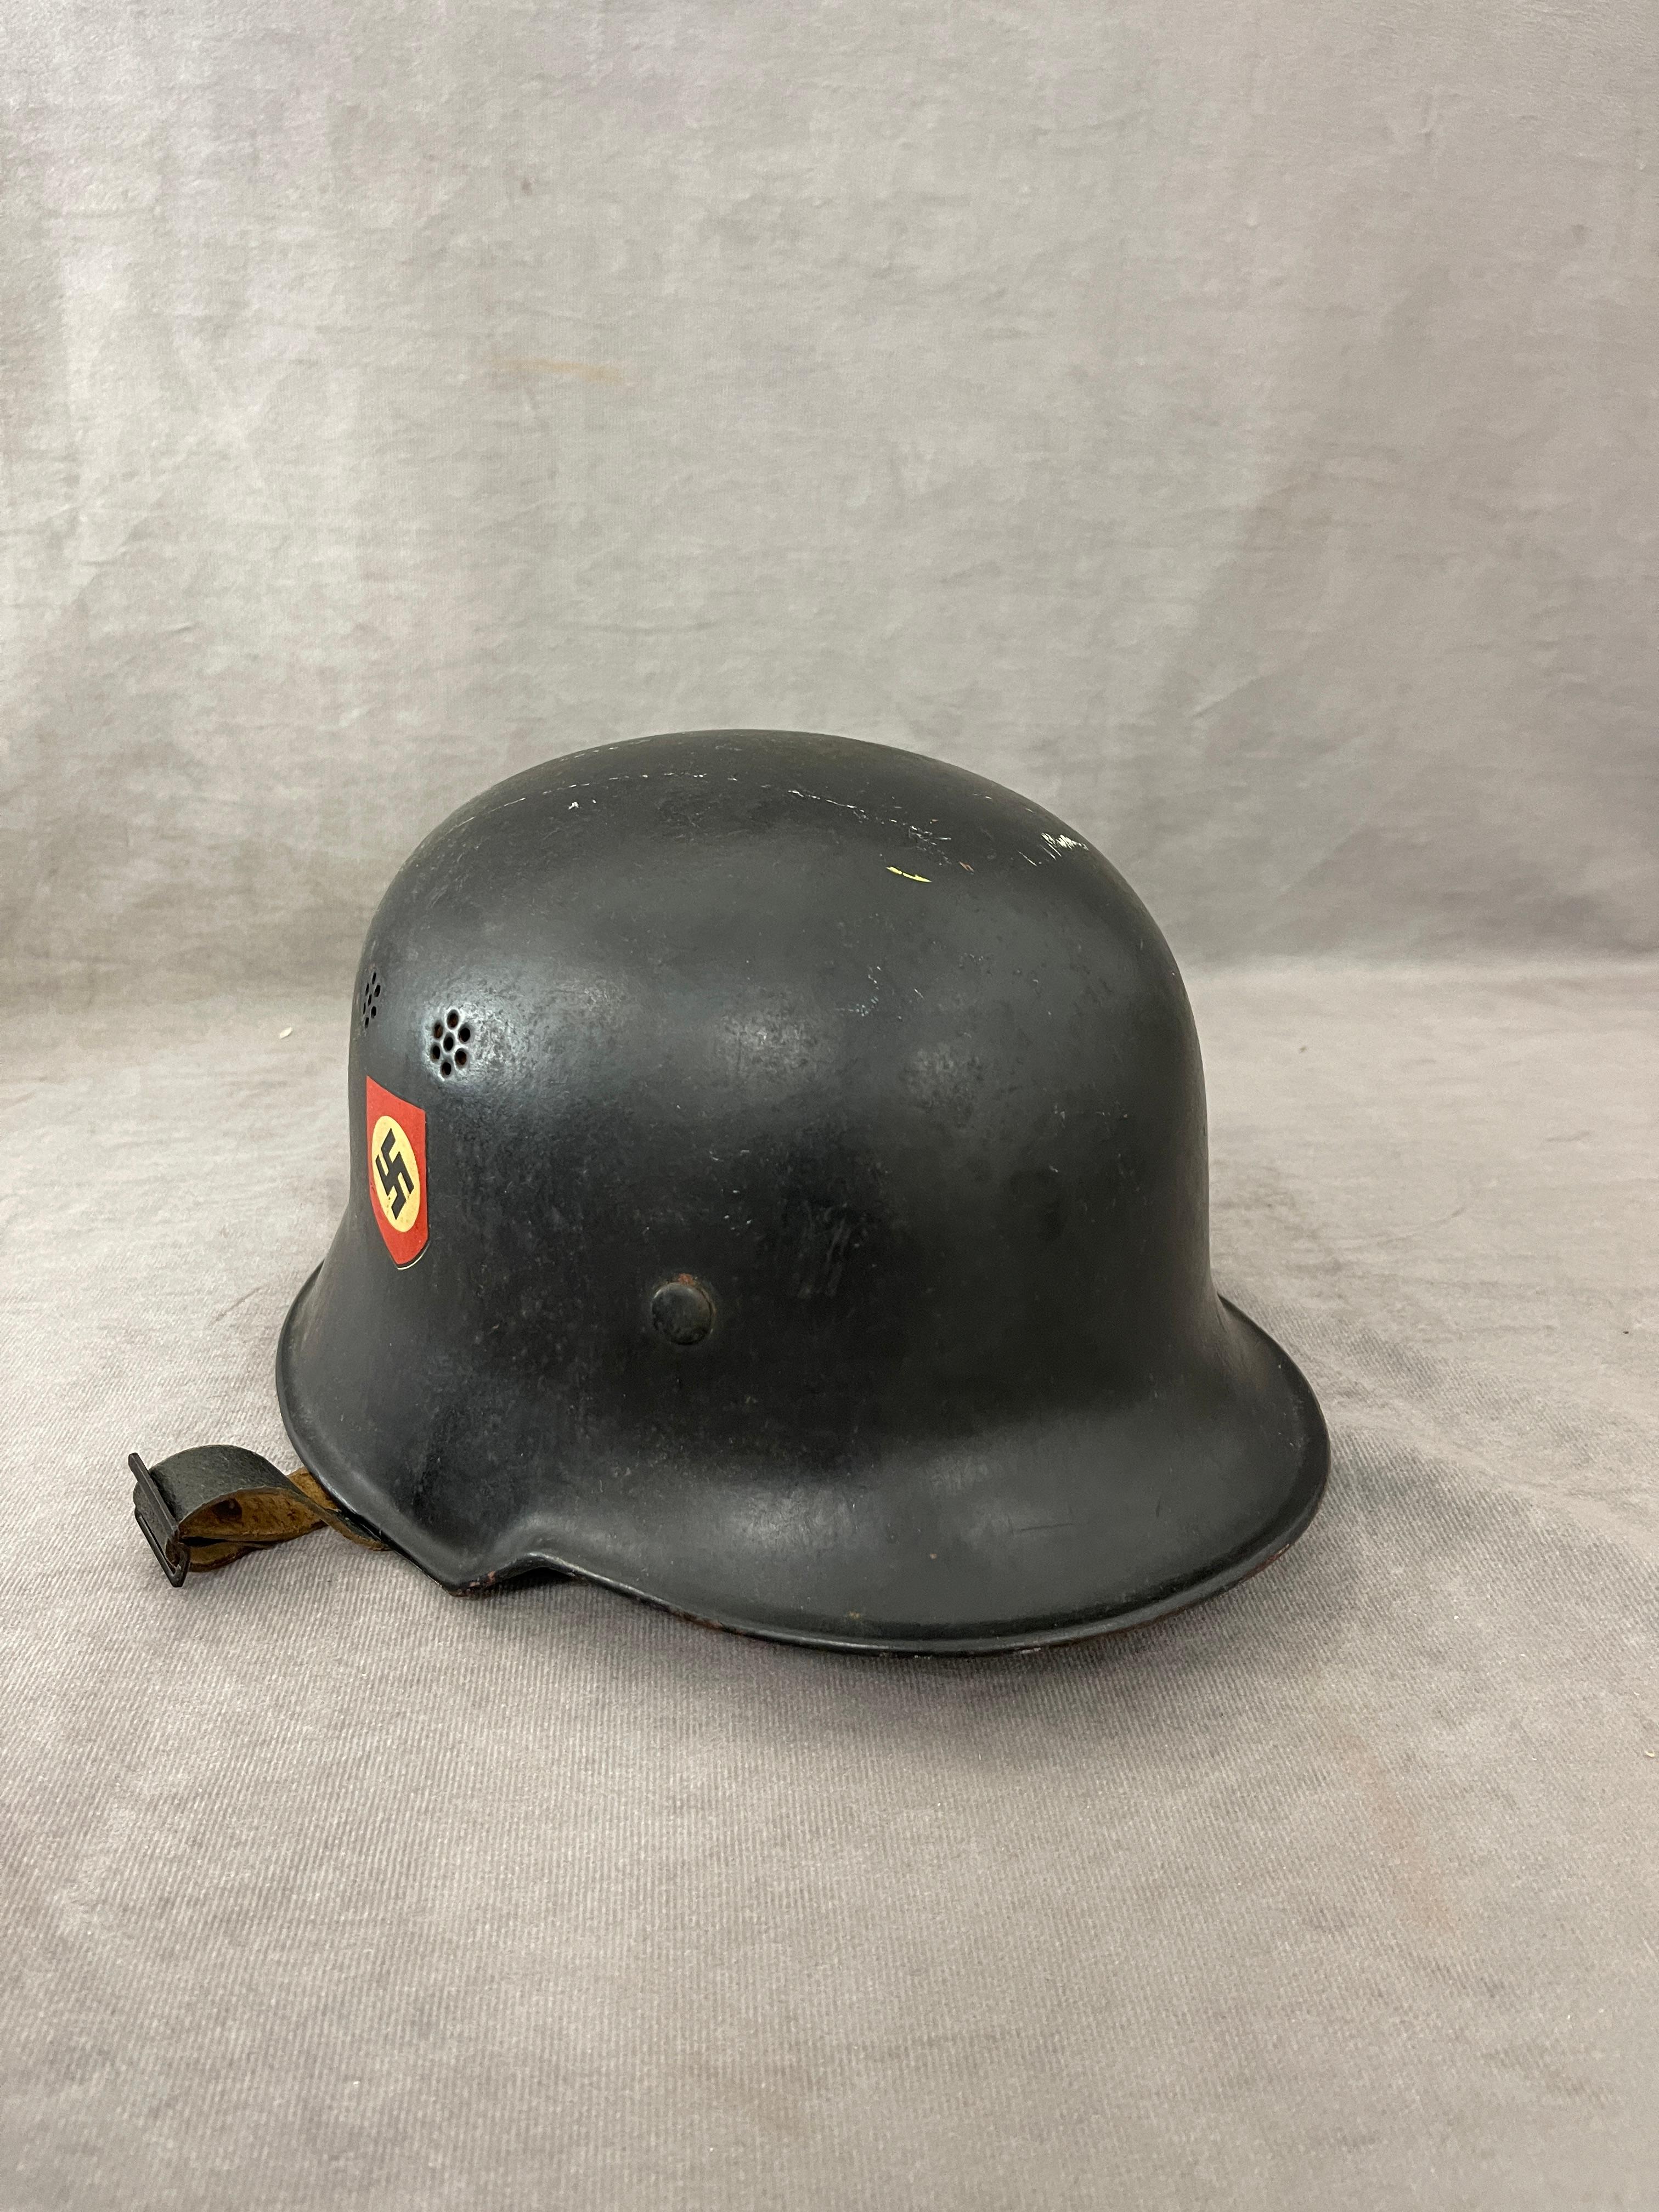 German WW2 WWII M1934 Fire Police Helmet with Doucle Decals Feuerwehr Rare